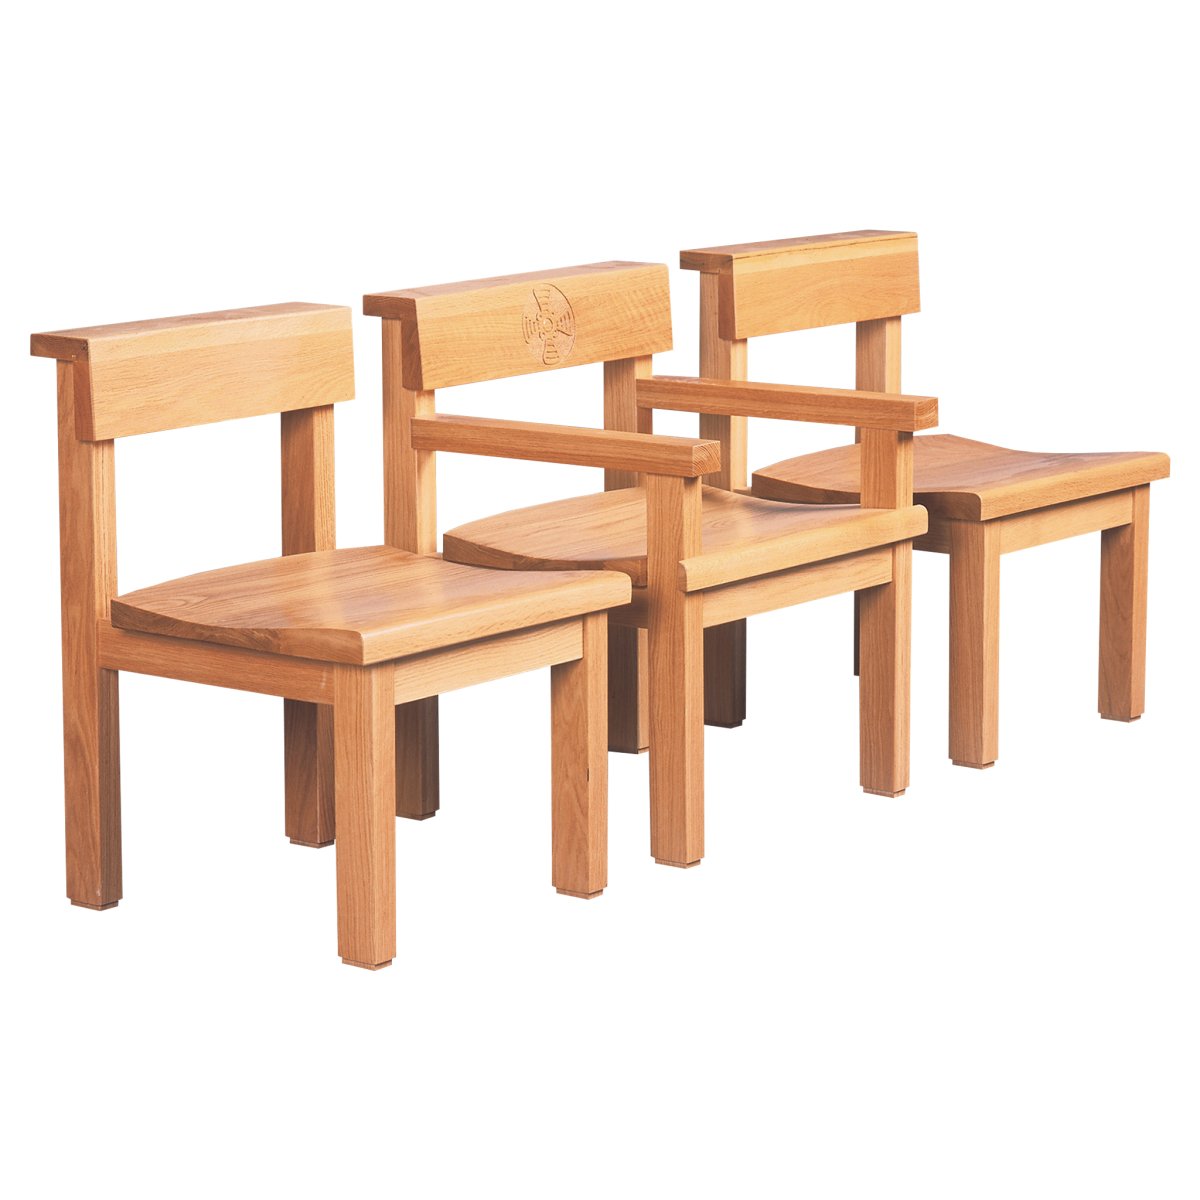 St Cuthbert's Presidential Chair - Hayes & Finch